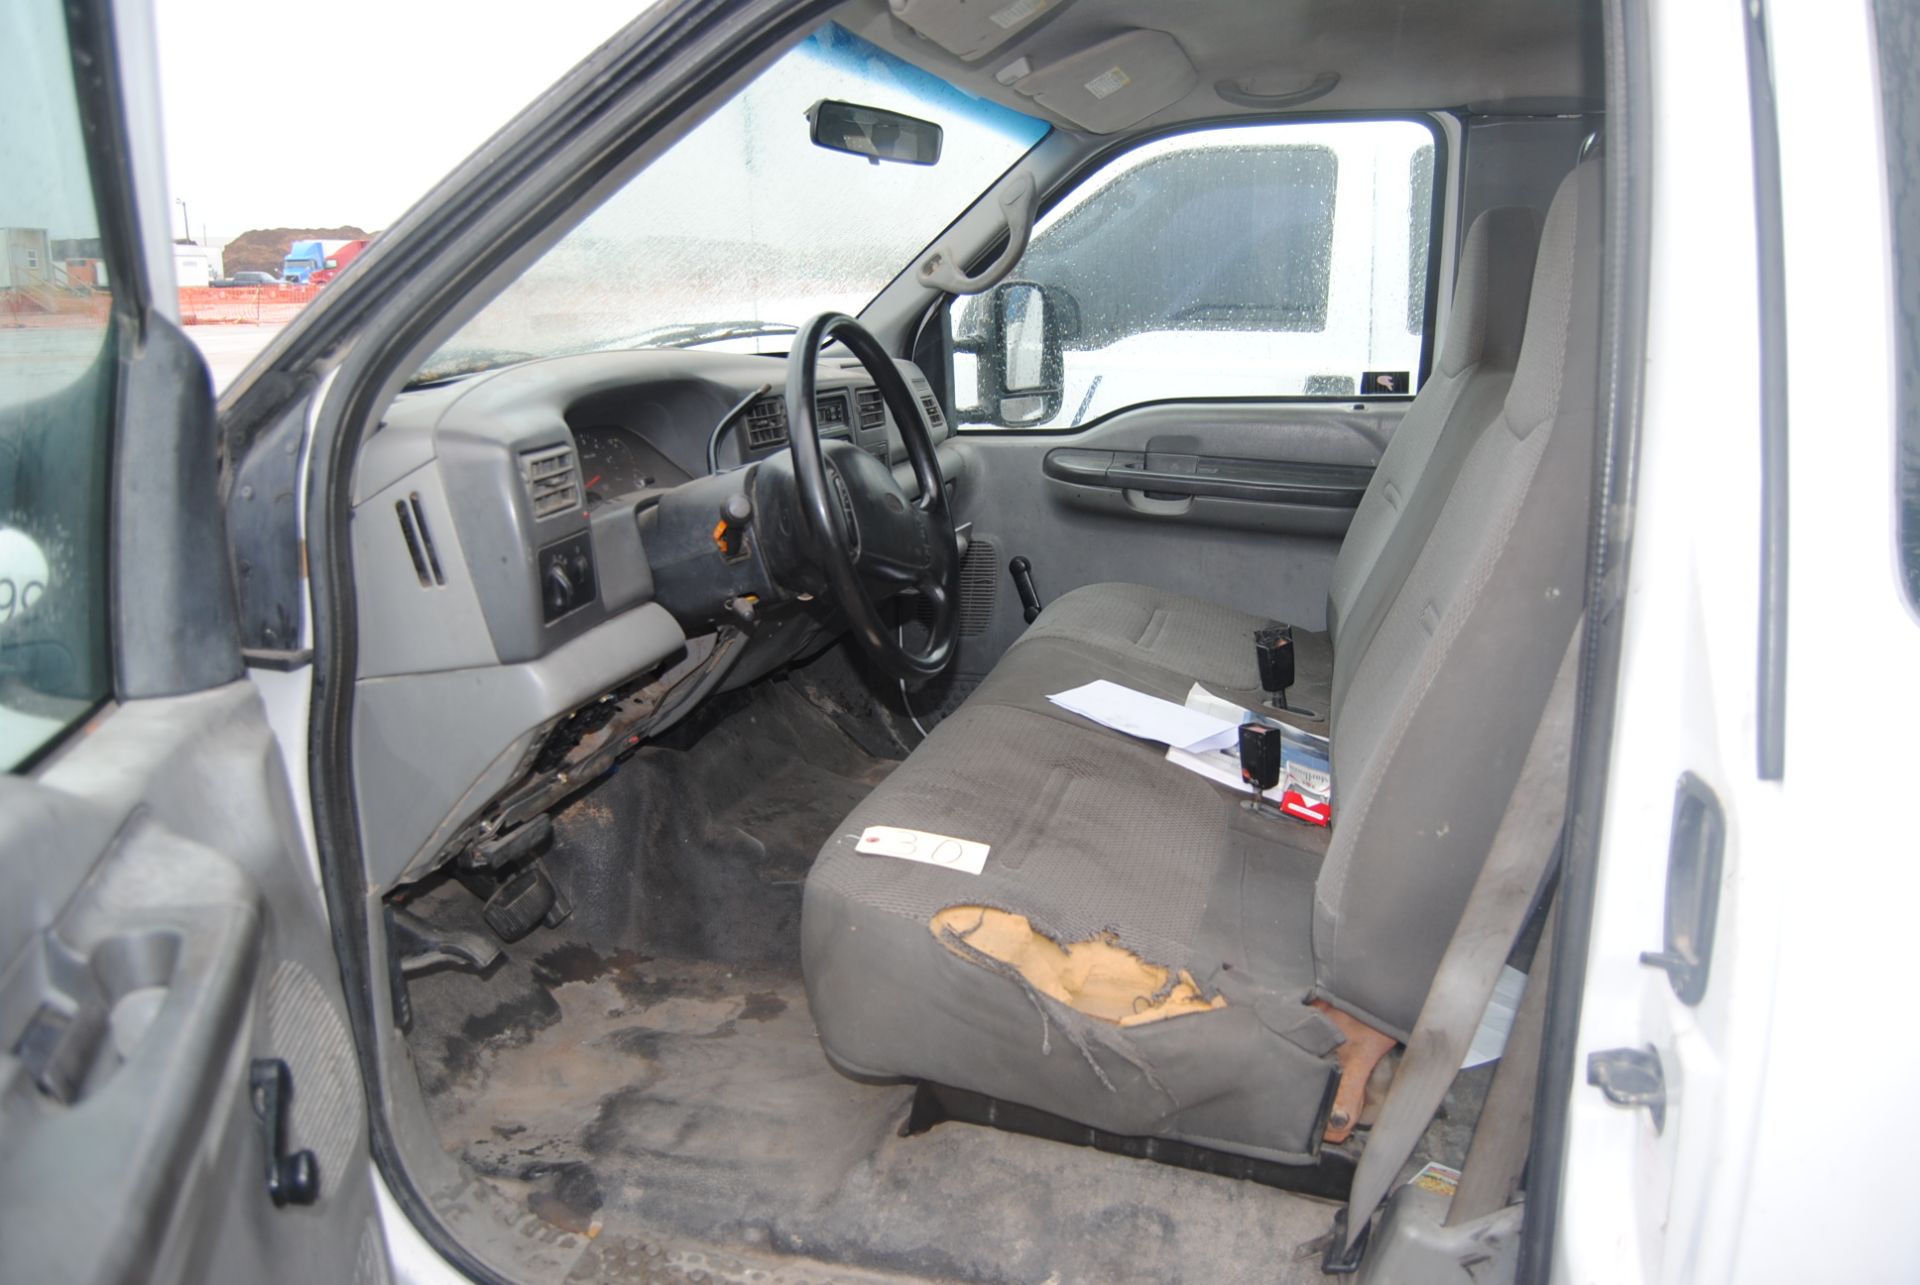 '04 Ford Work Truck F250 Super Duty - Image 8 of 11